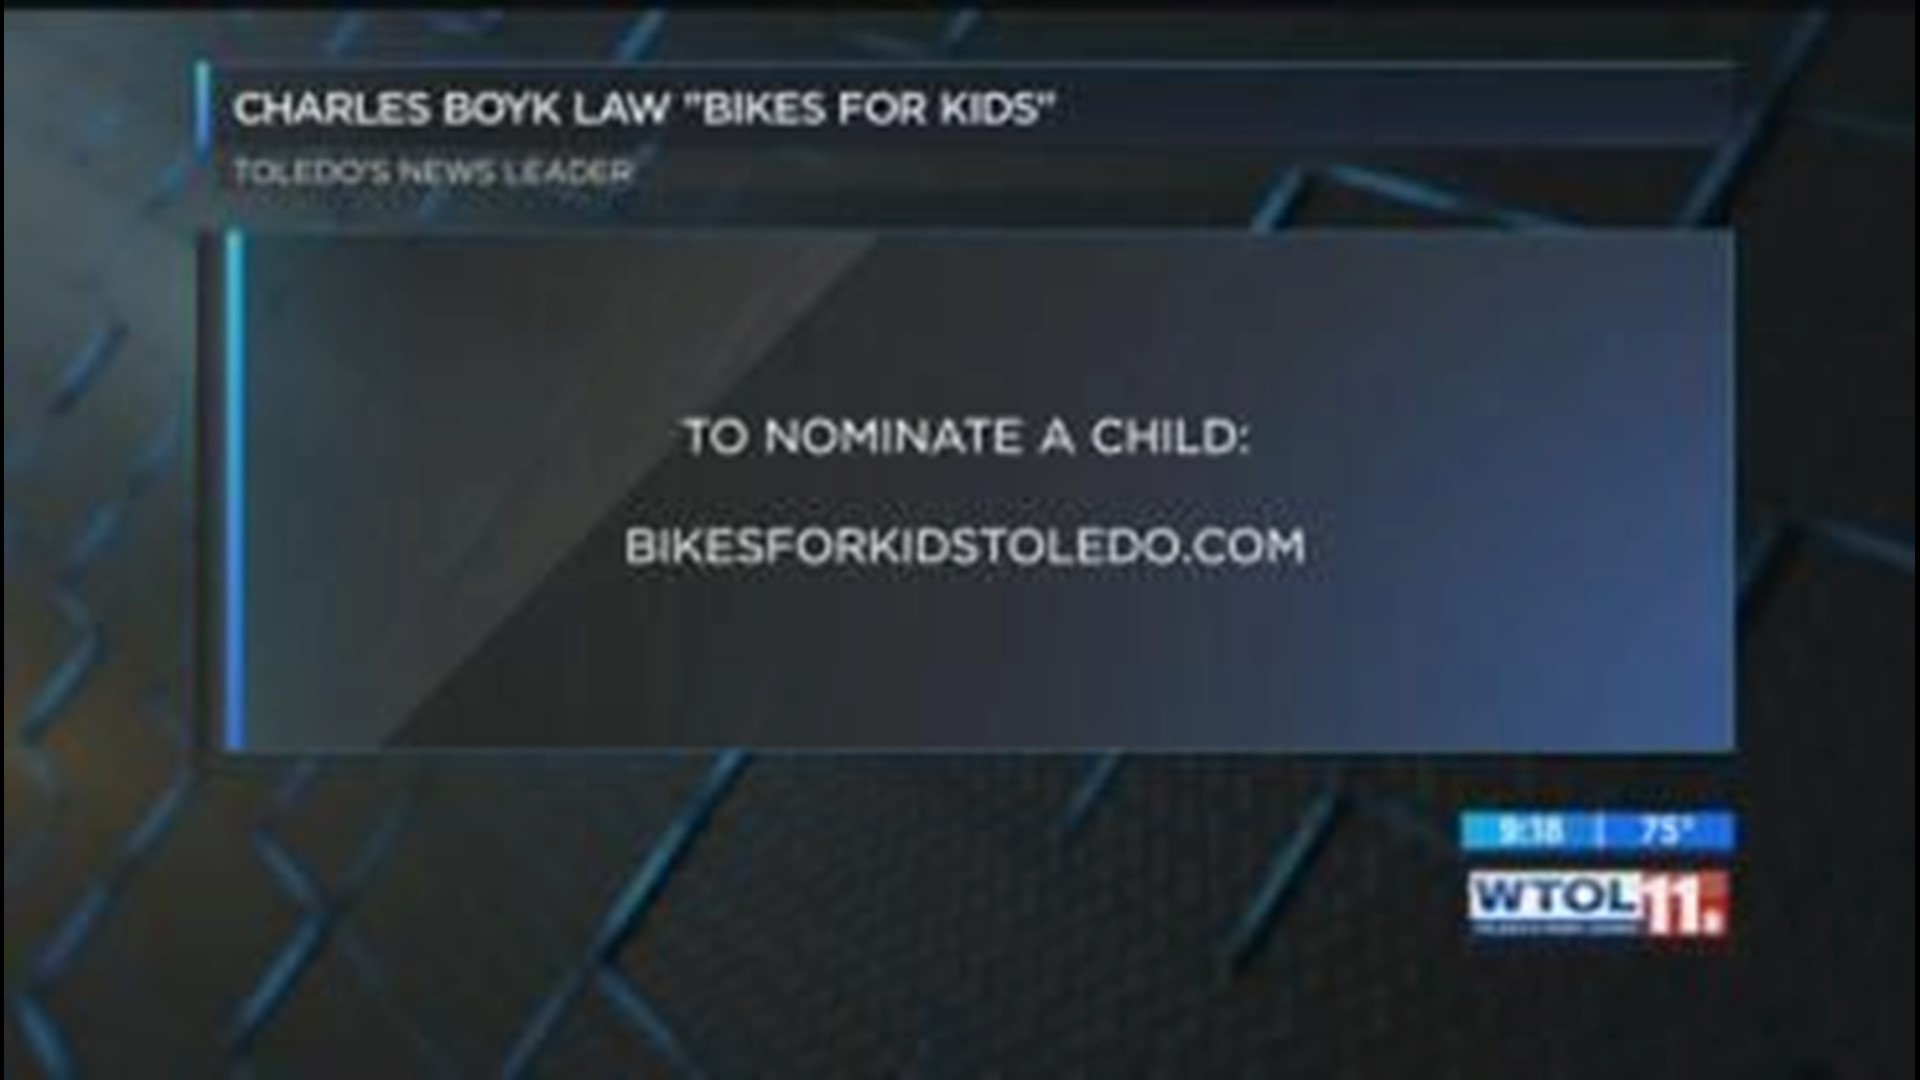 Bikes For Kids is back!